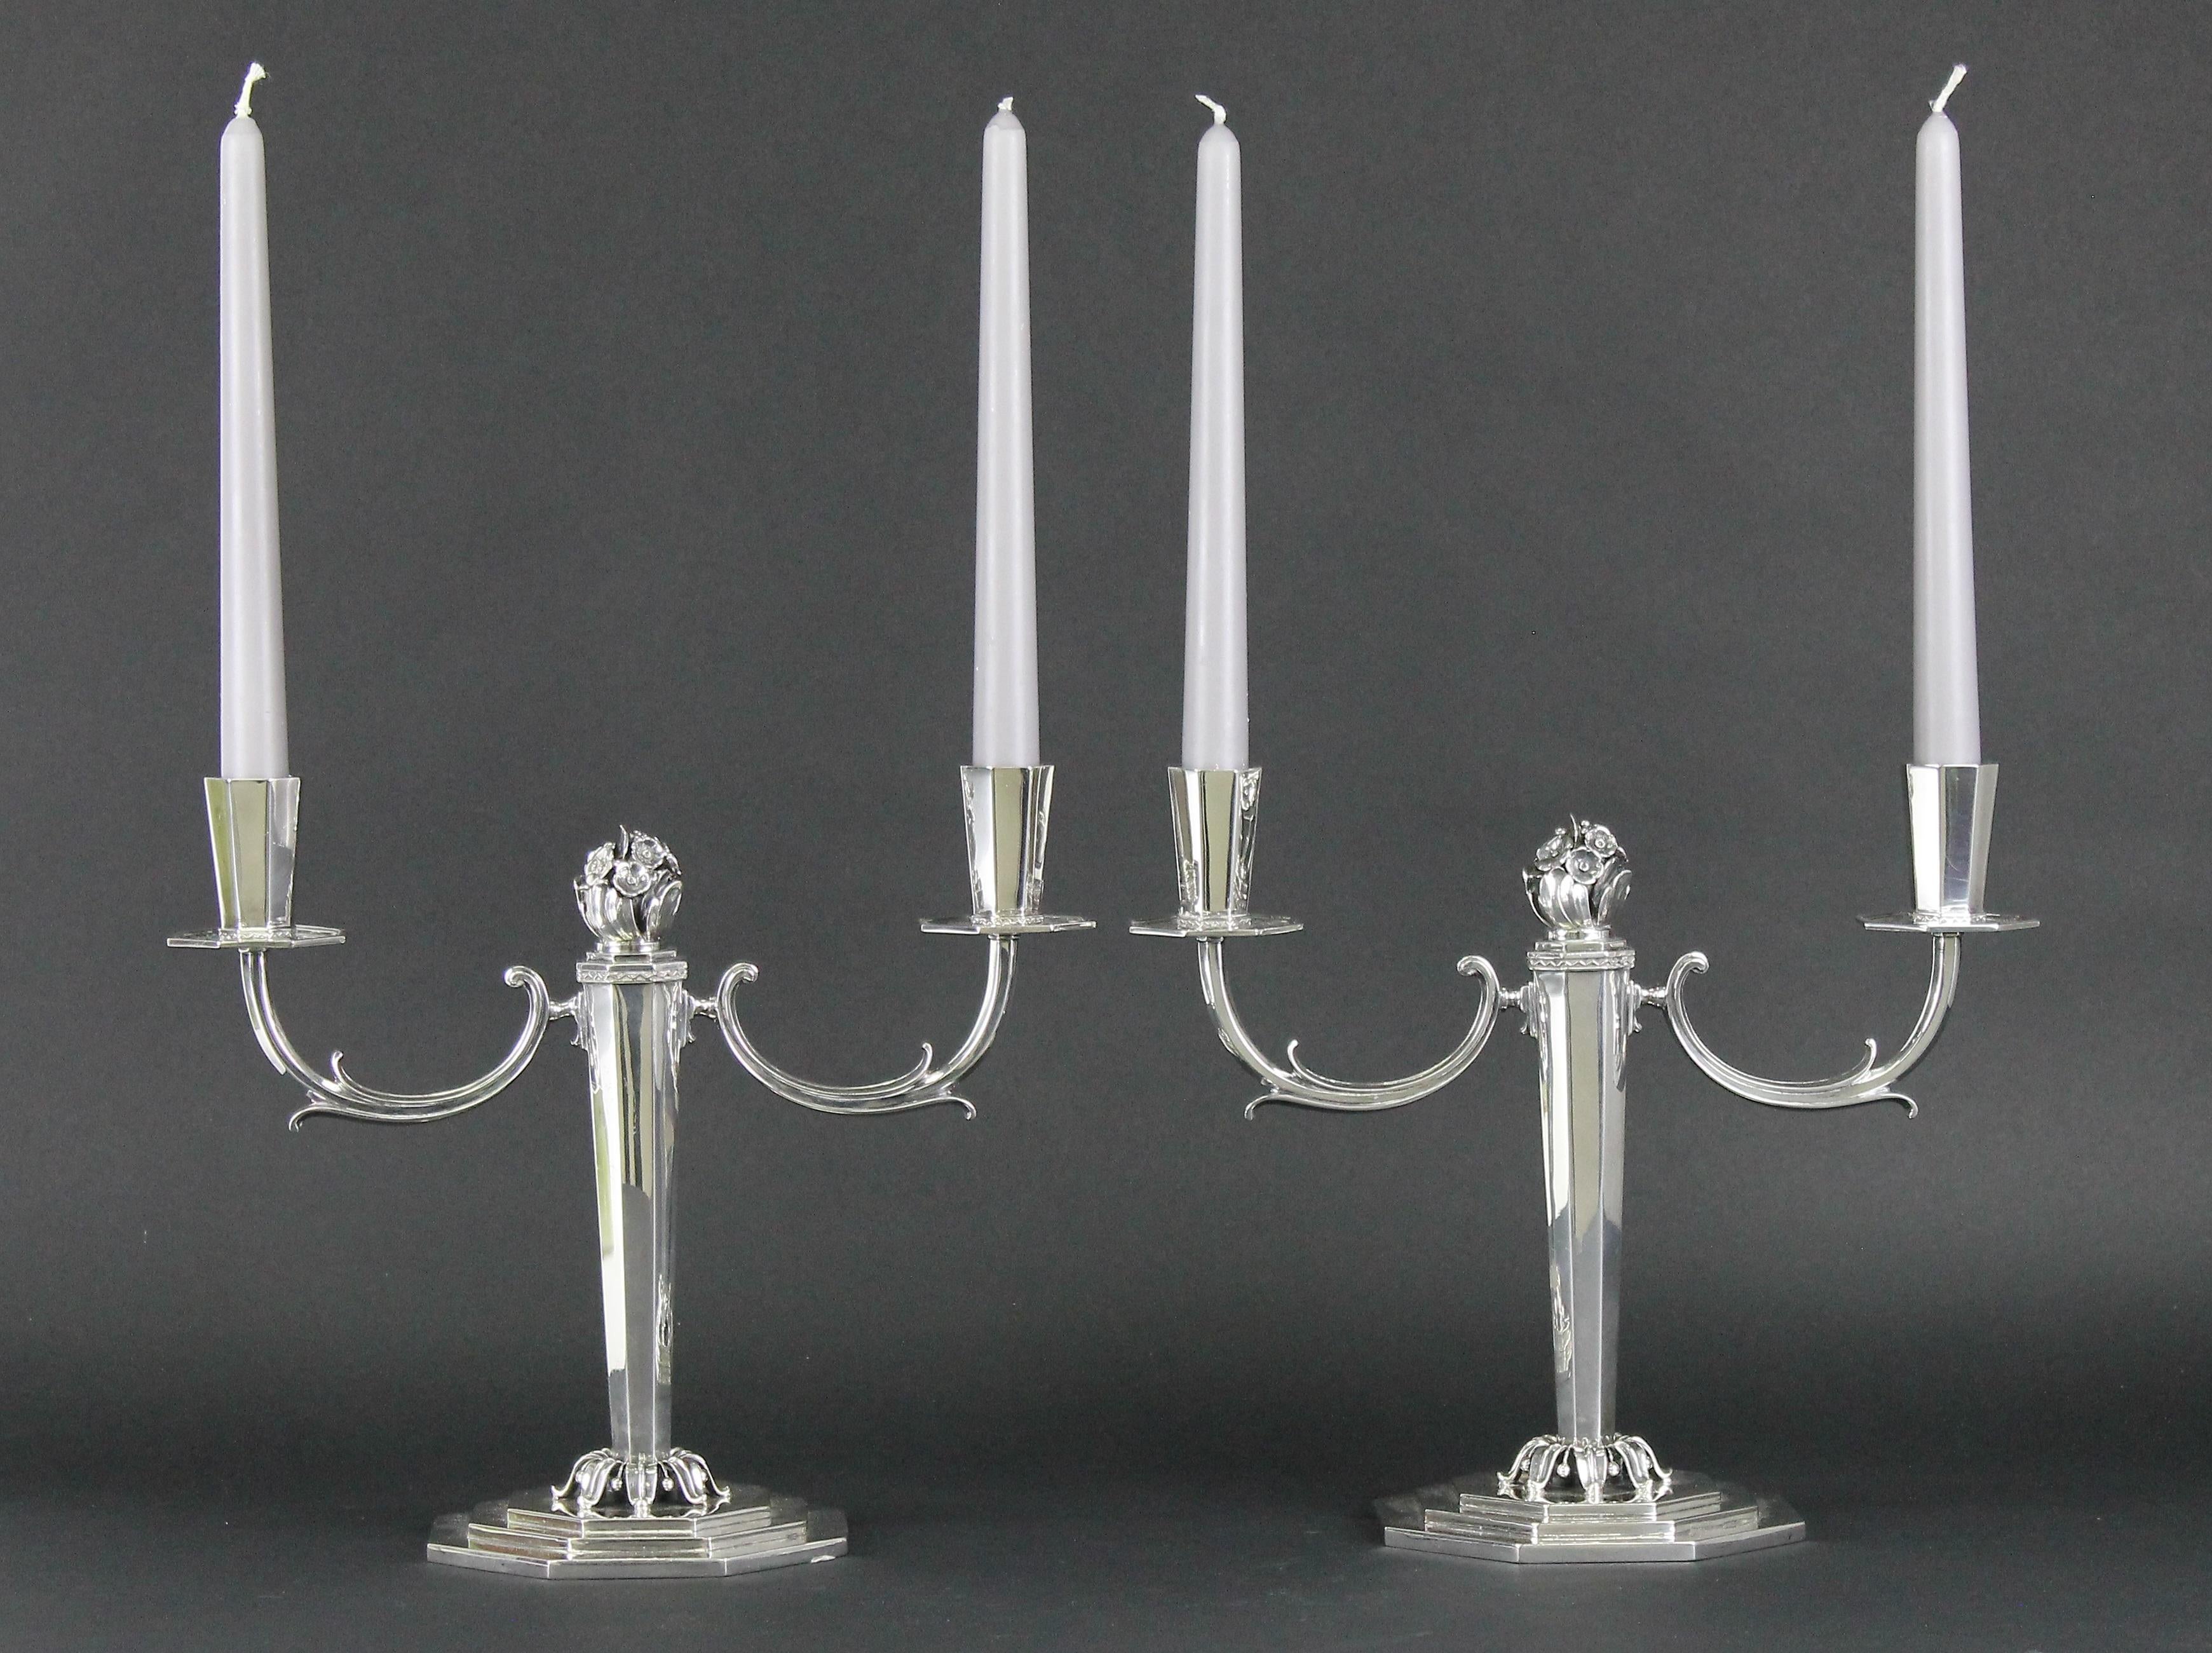 Swedish modernist silver candelabras by Helge Lindgren for Karl Anderson, Stockholm 1943.
Outstanding quality and in great condition!

Height 24cm. Weight 1684gr (for the pair). Fully marked with Swedish silver marks (see image).

Helge